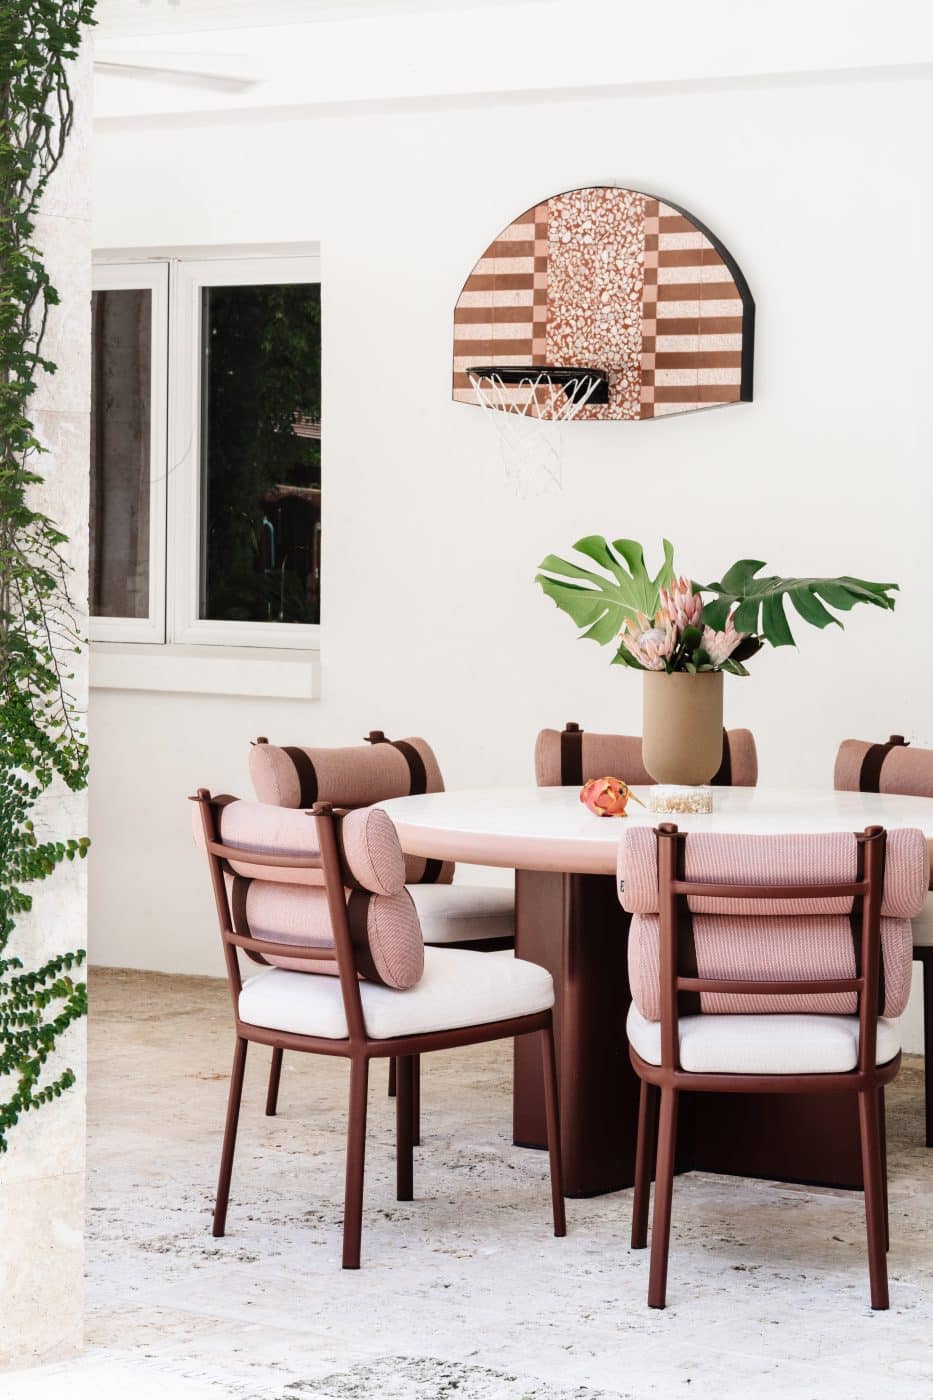 Miami interior design studio Moniomi's Lux Mini Hoop basketball hoop and backboard hangs on a wall behind a dining table and chairs